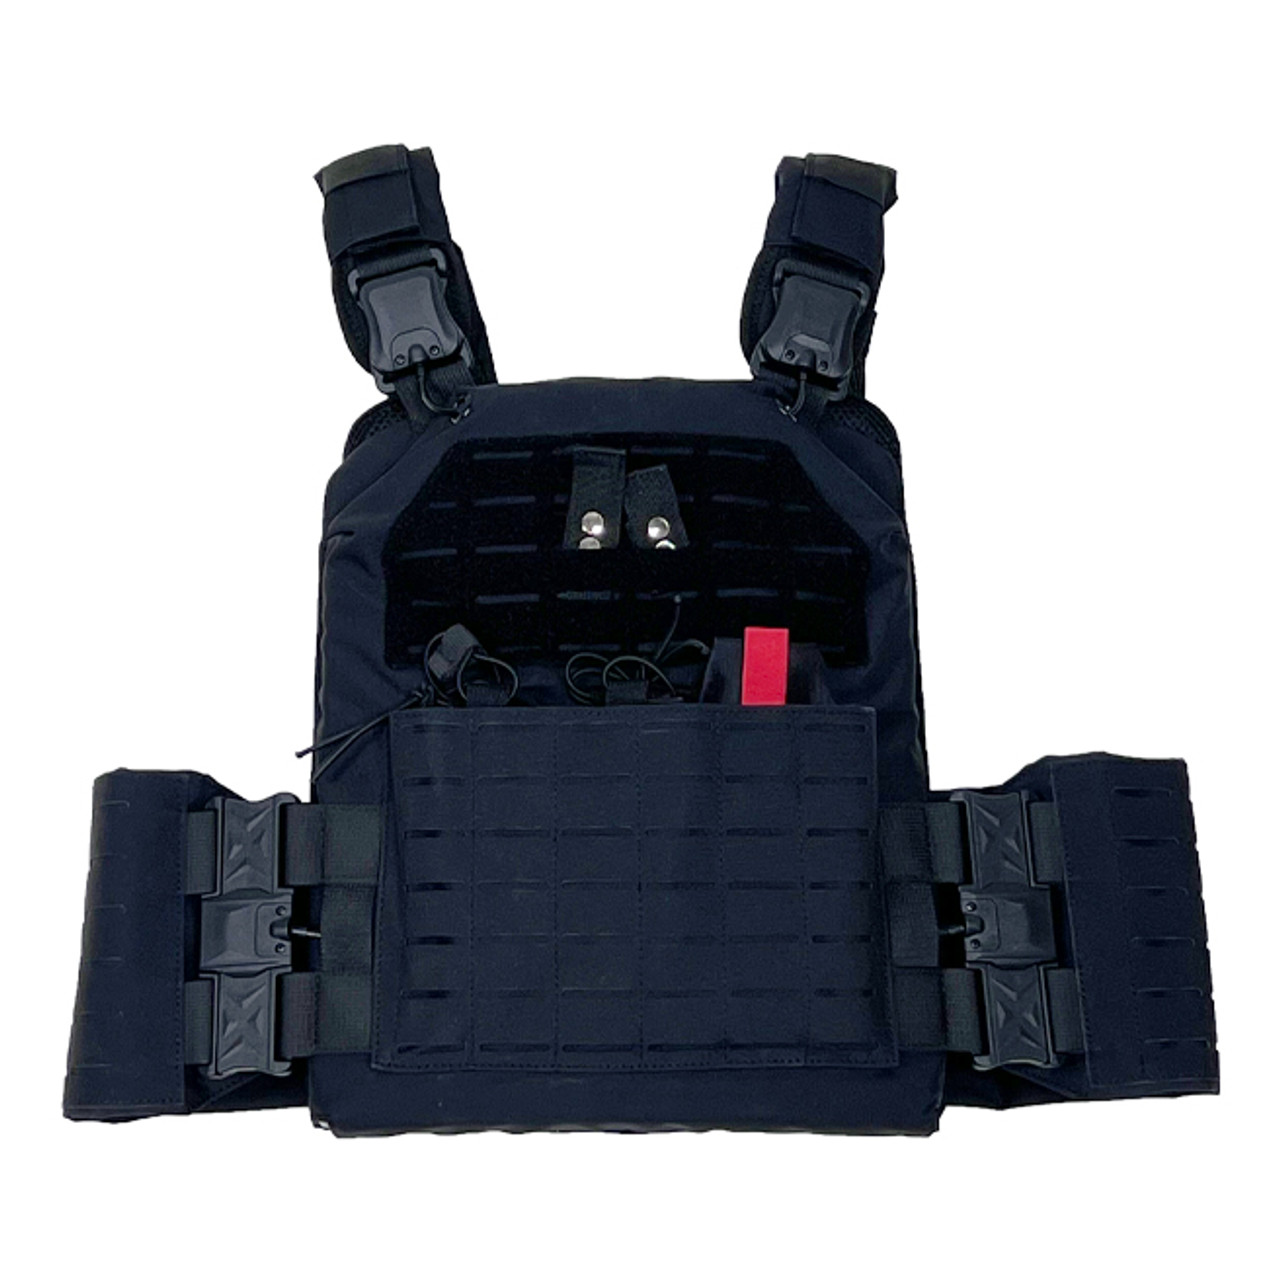 NcSTAR CVCQR3054B Magnetic Quick Release LCS Laser Cut Plate Carrier Holds 10x12 Plates